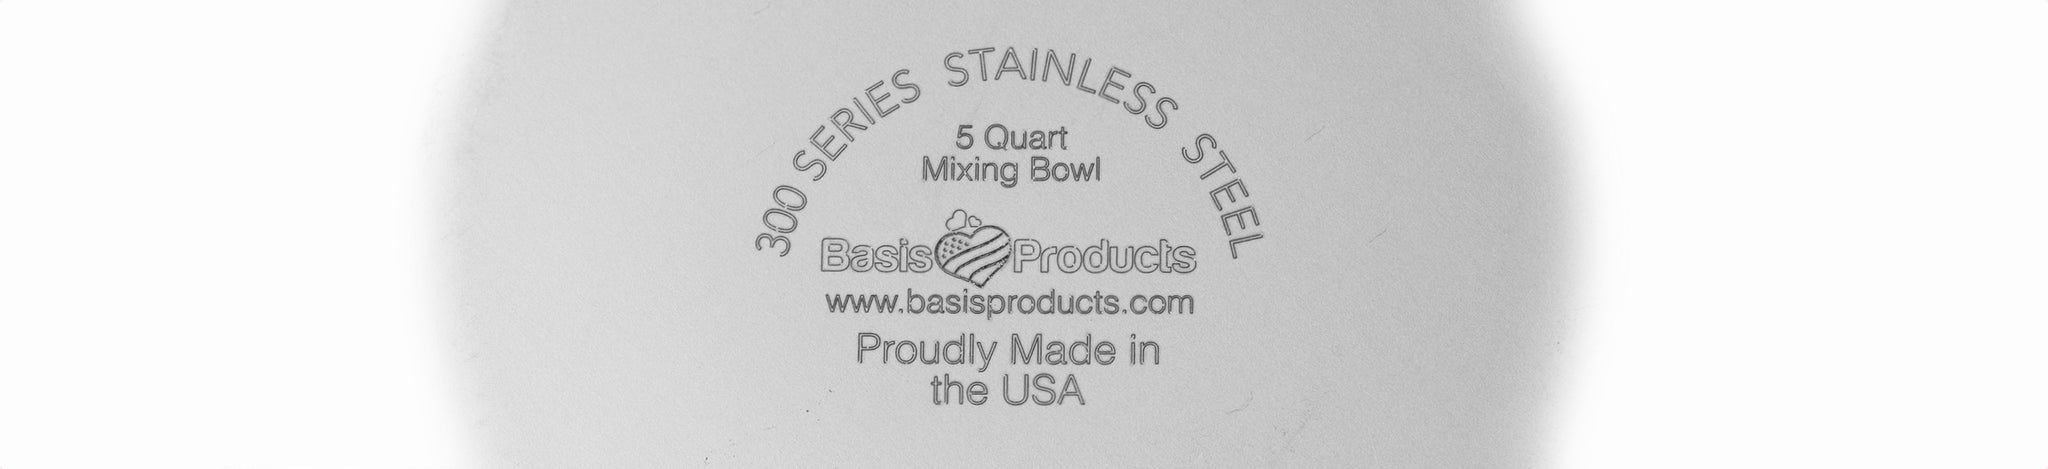 Workhorse Stainless Steel Mixing Bowls - Made in the USA